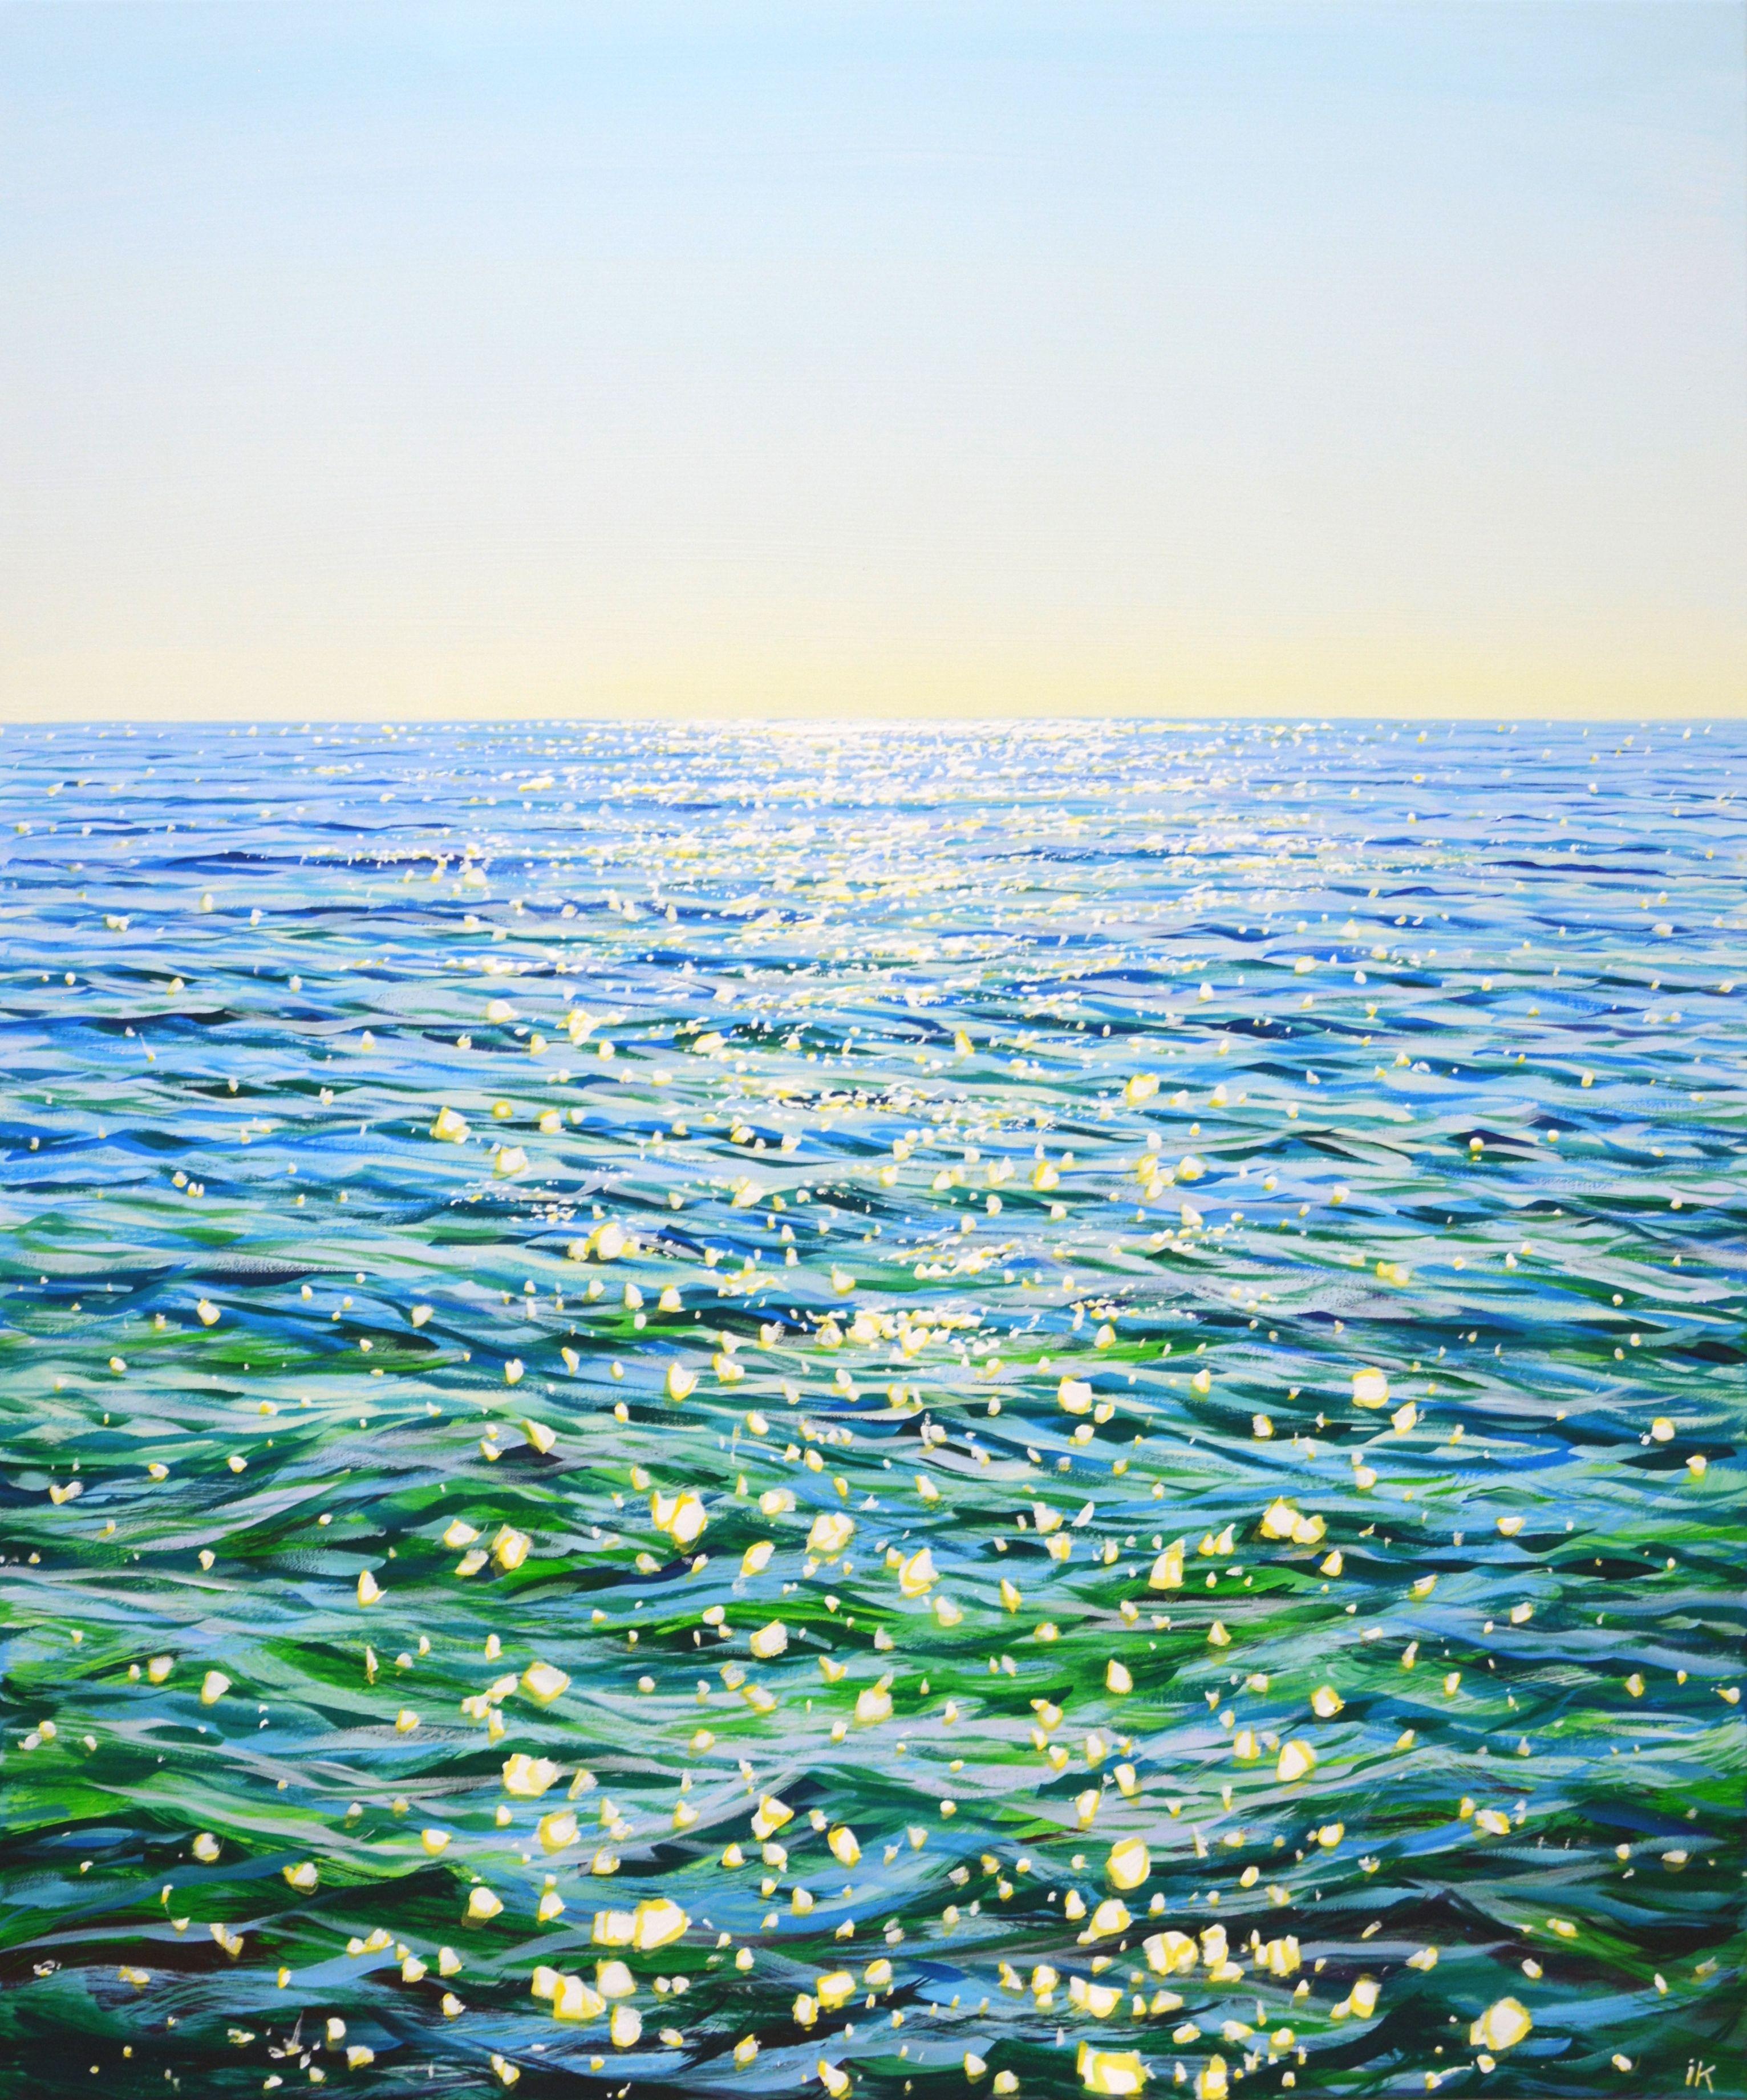 Music of the ocean 2. Blue water, ocean, shimmering sun glare on the water, clear sky, small waves, create an atmosphere of relaxation and romance. Made in the style of realism, light blue, emerald, white palette emphasizes the energy of water. Part